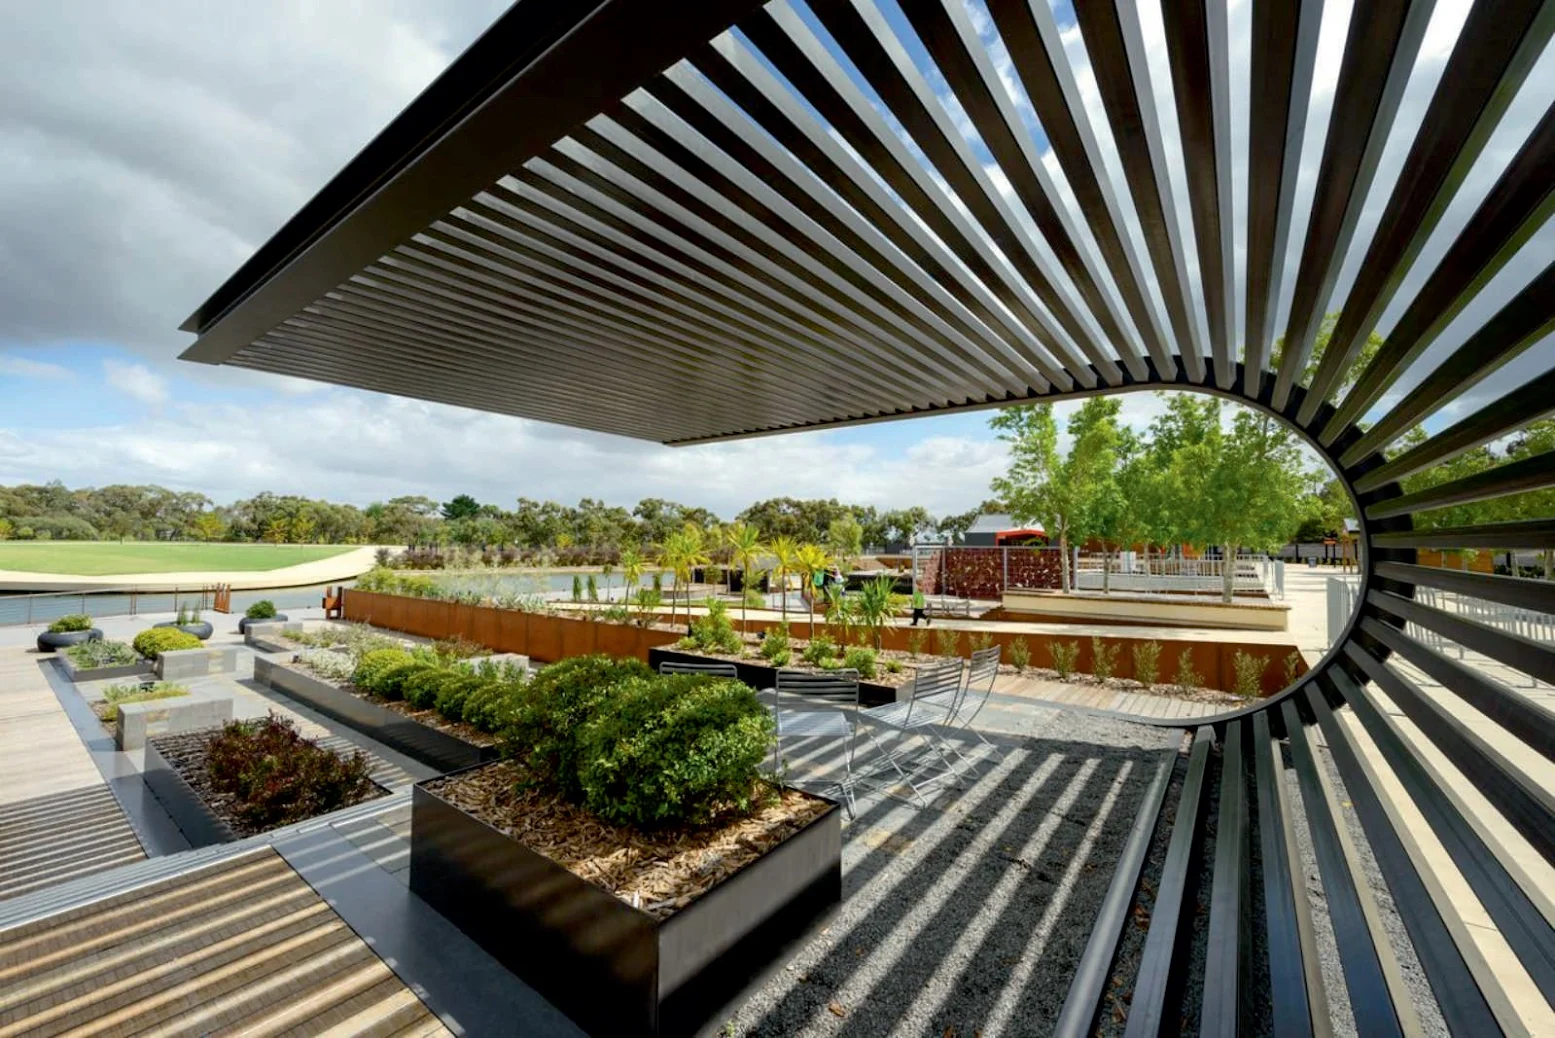 The Australian Garden by Taylor Cullity Lethlean and